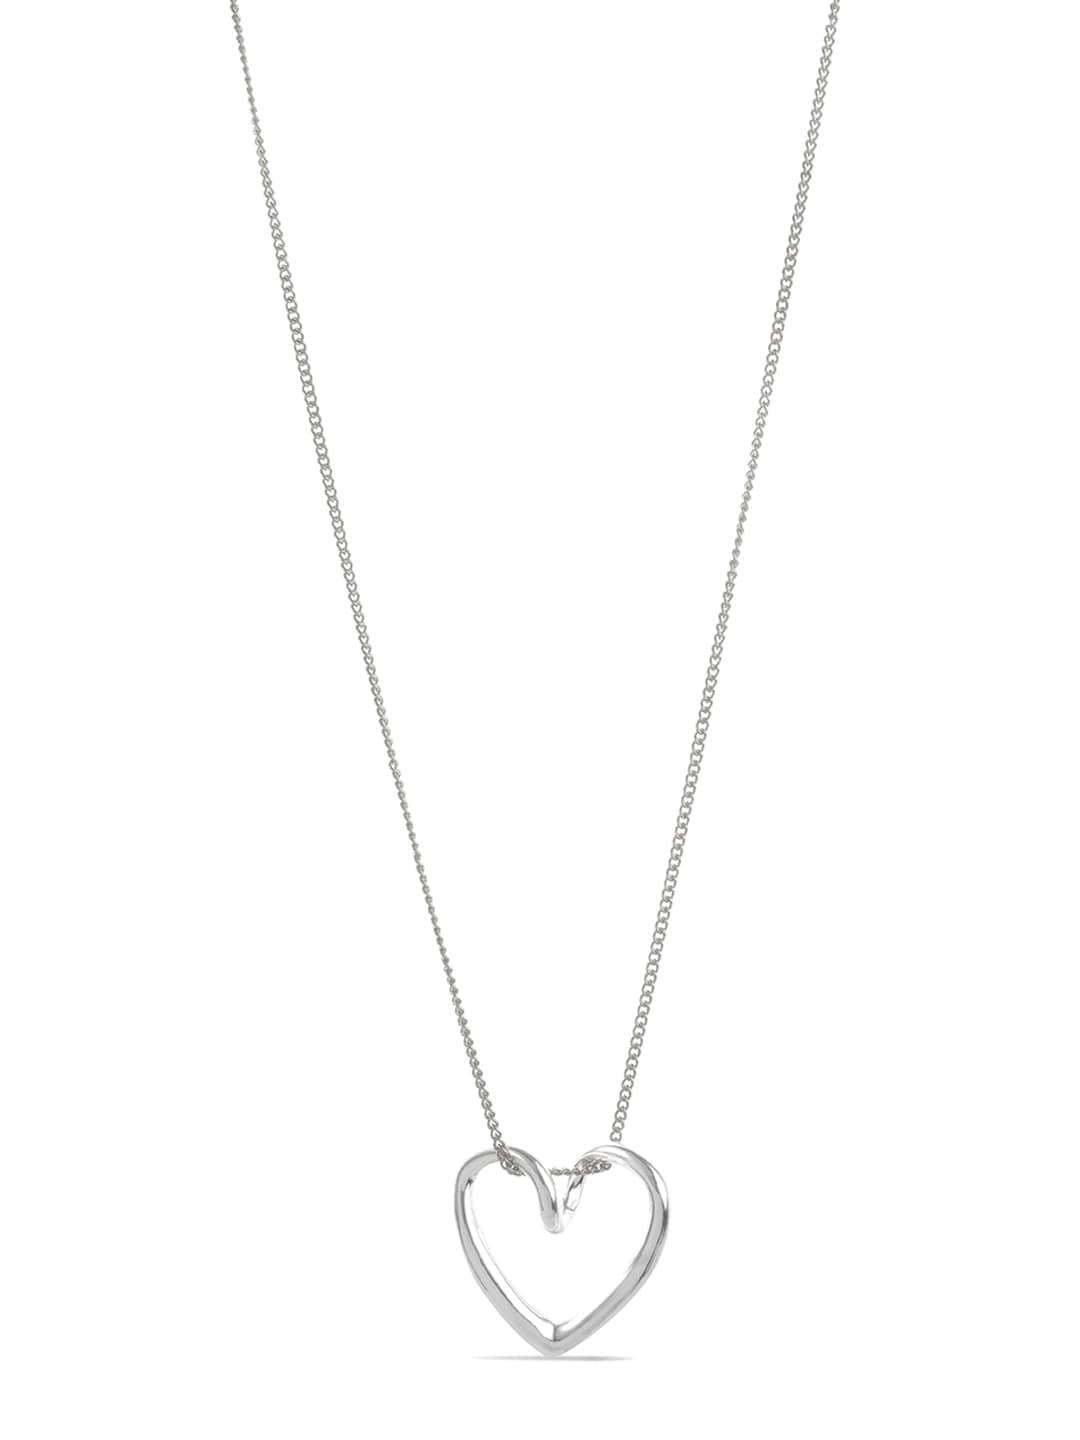 kicky-and-perky-925-sterling-silver-minimal-heart-pendant